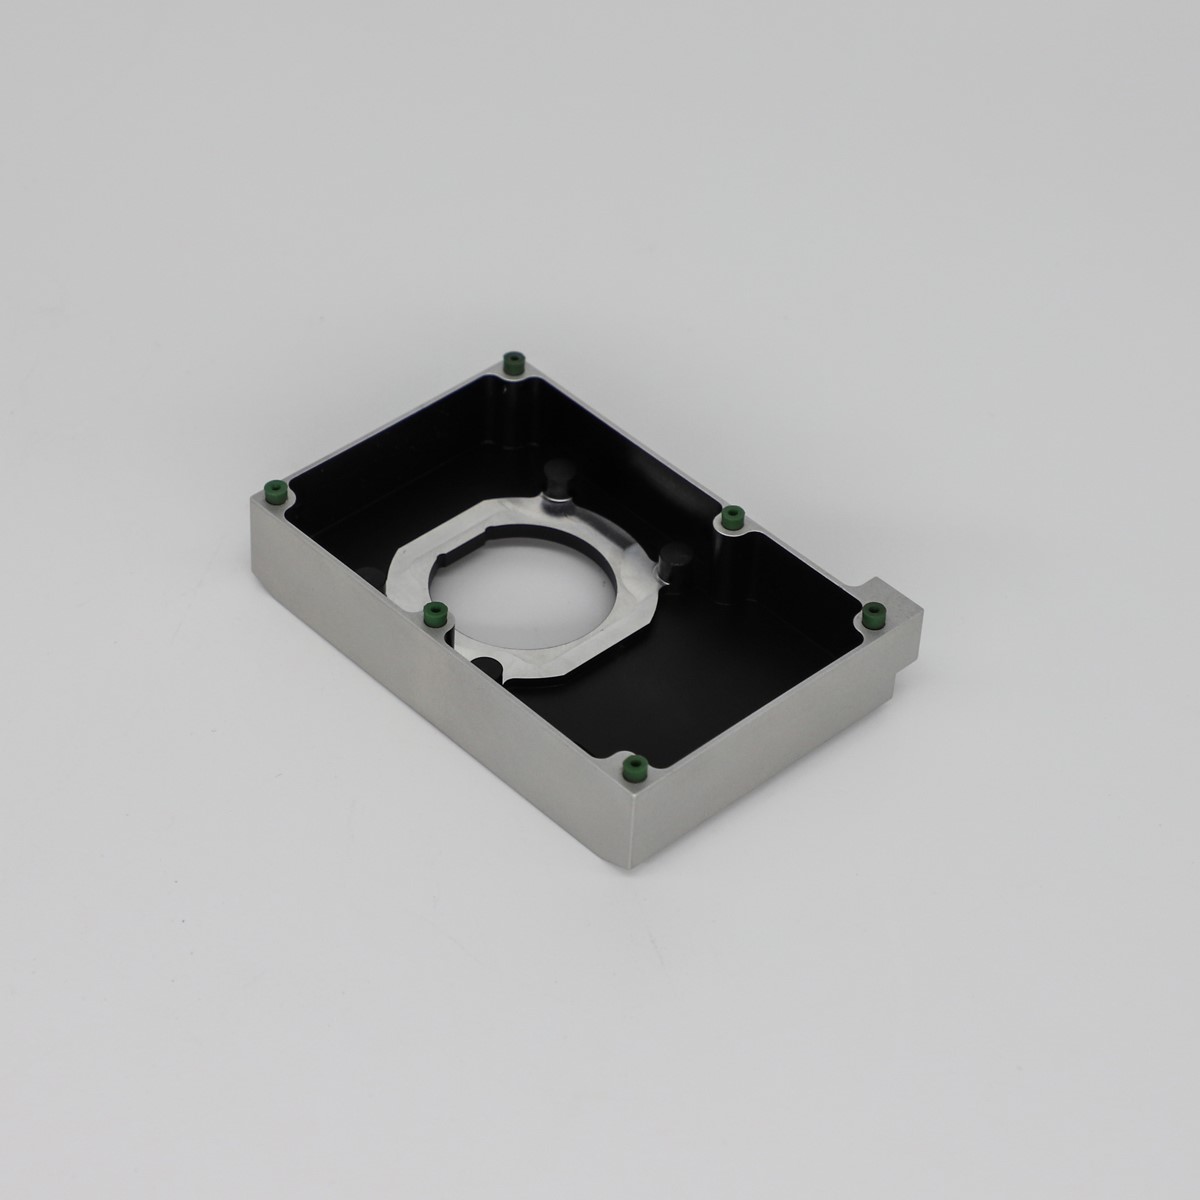 Xavier housing cnc camera housing parts excellent quality at discount-1